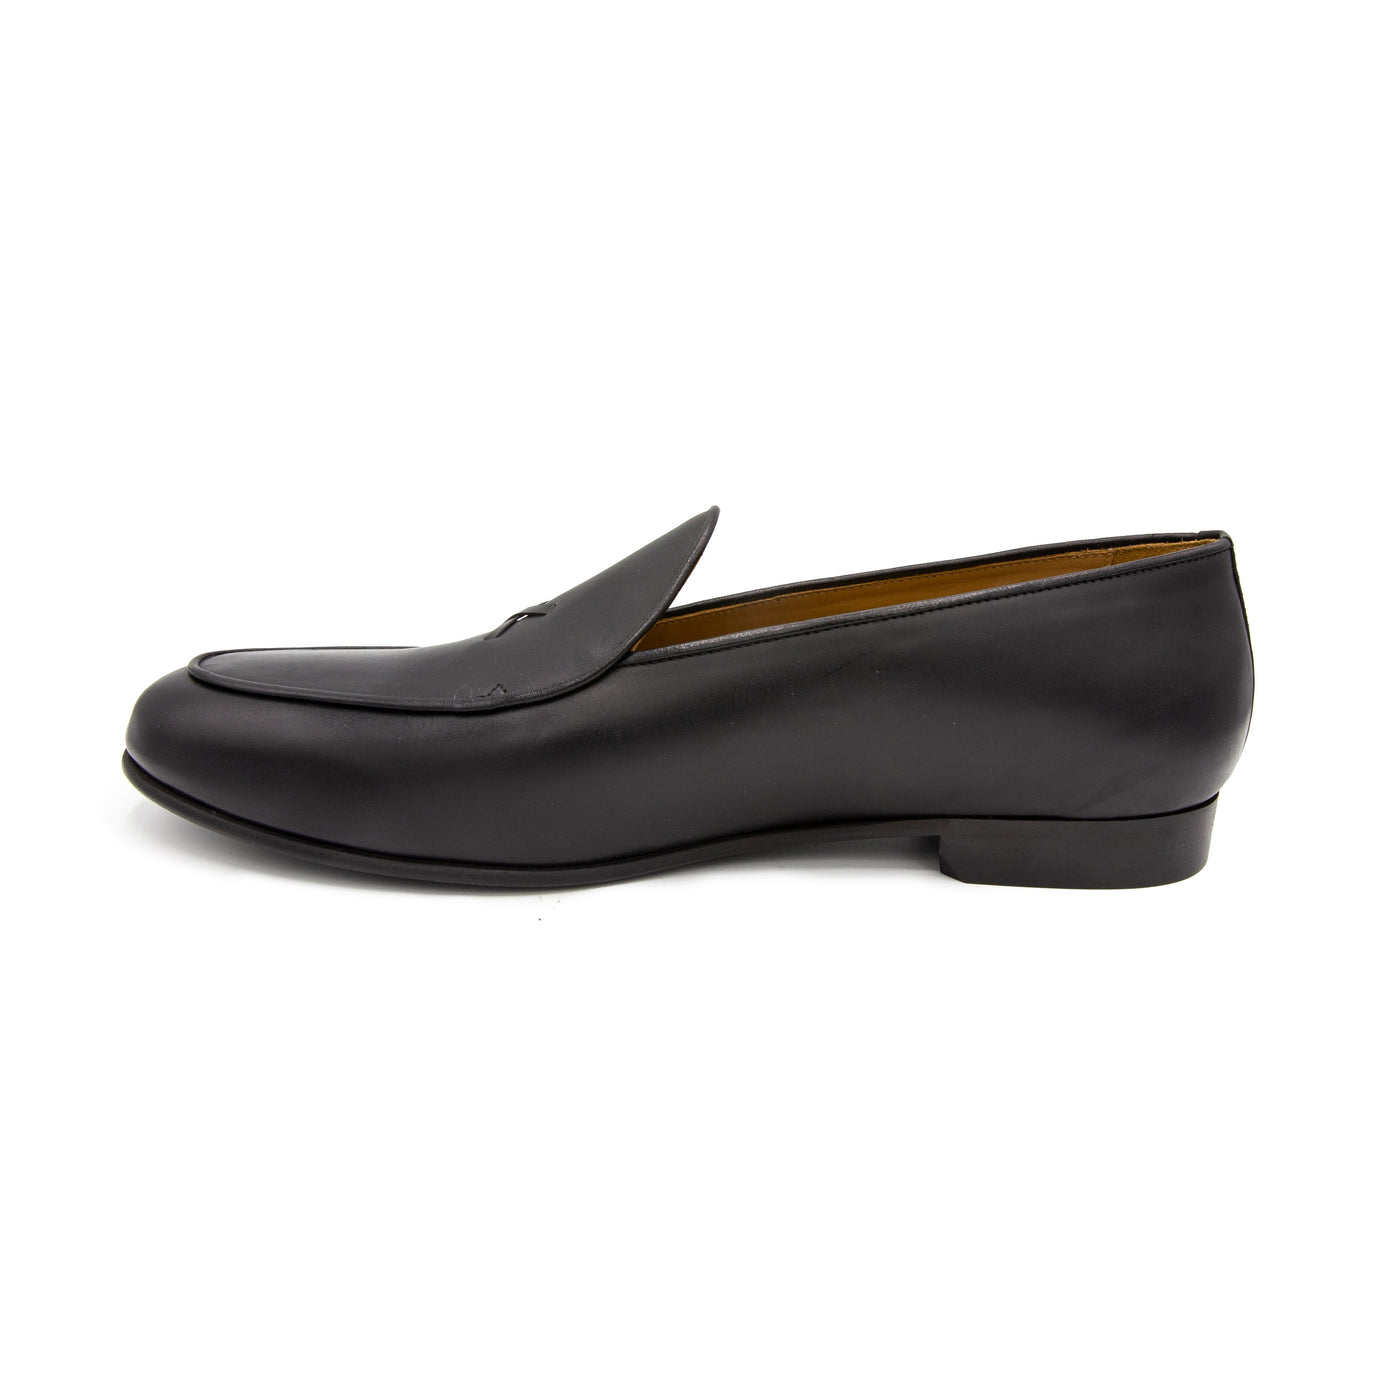 Men's Black Leather Milano Loafer by Del Toro Shoes